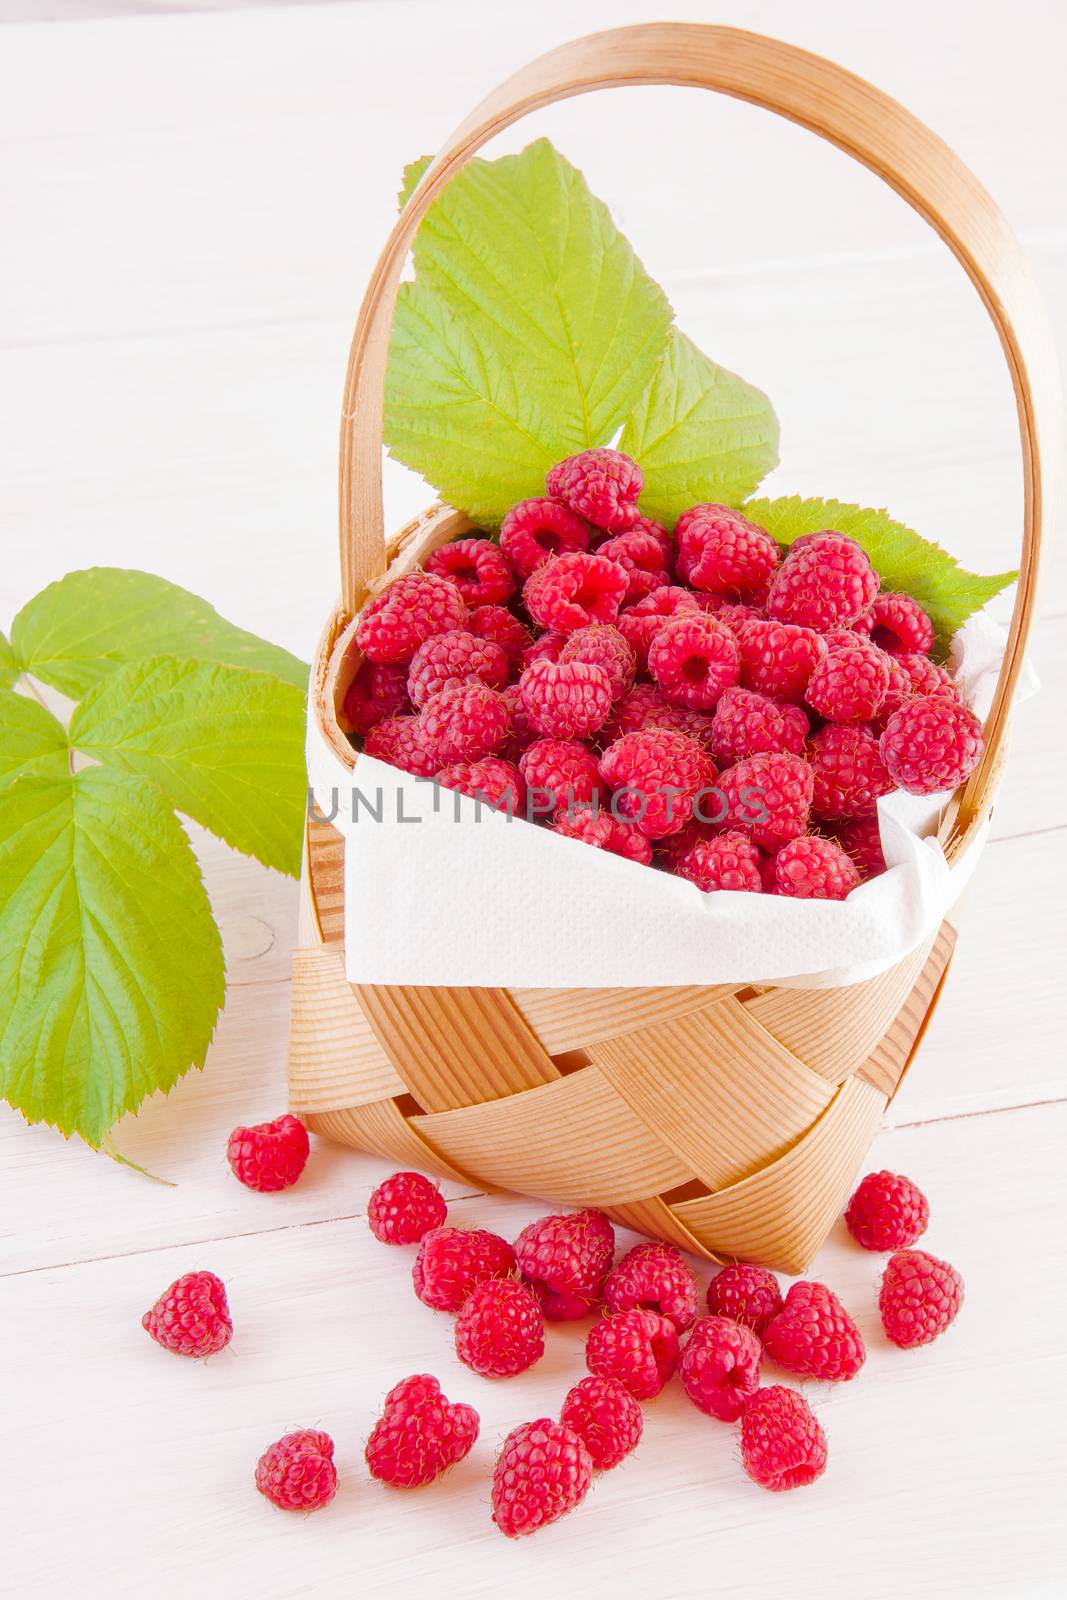 Fresh fruits raspberries in a wooden little basket on a white table